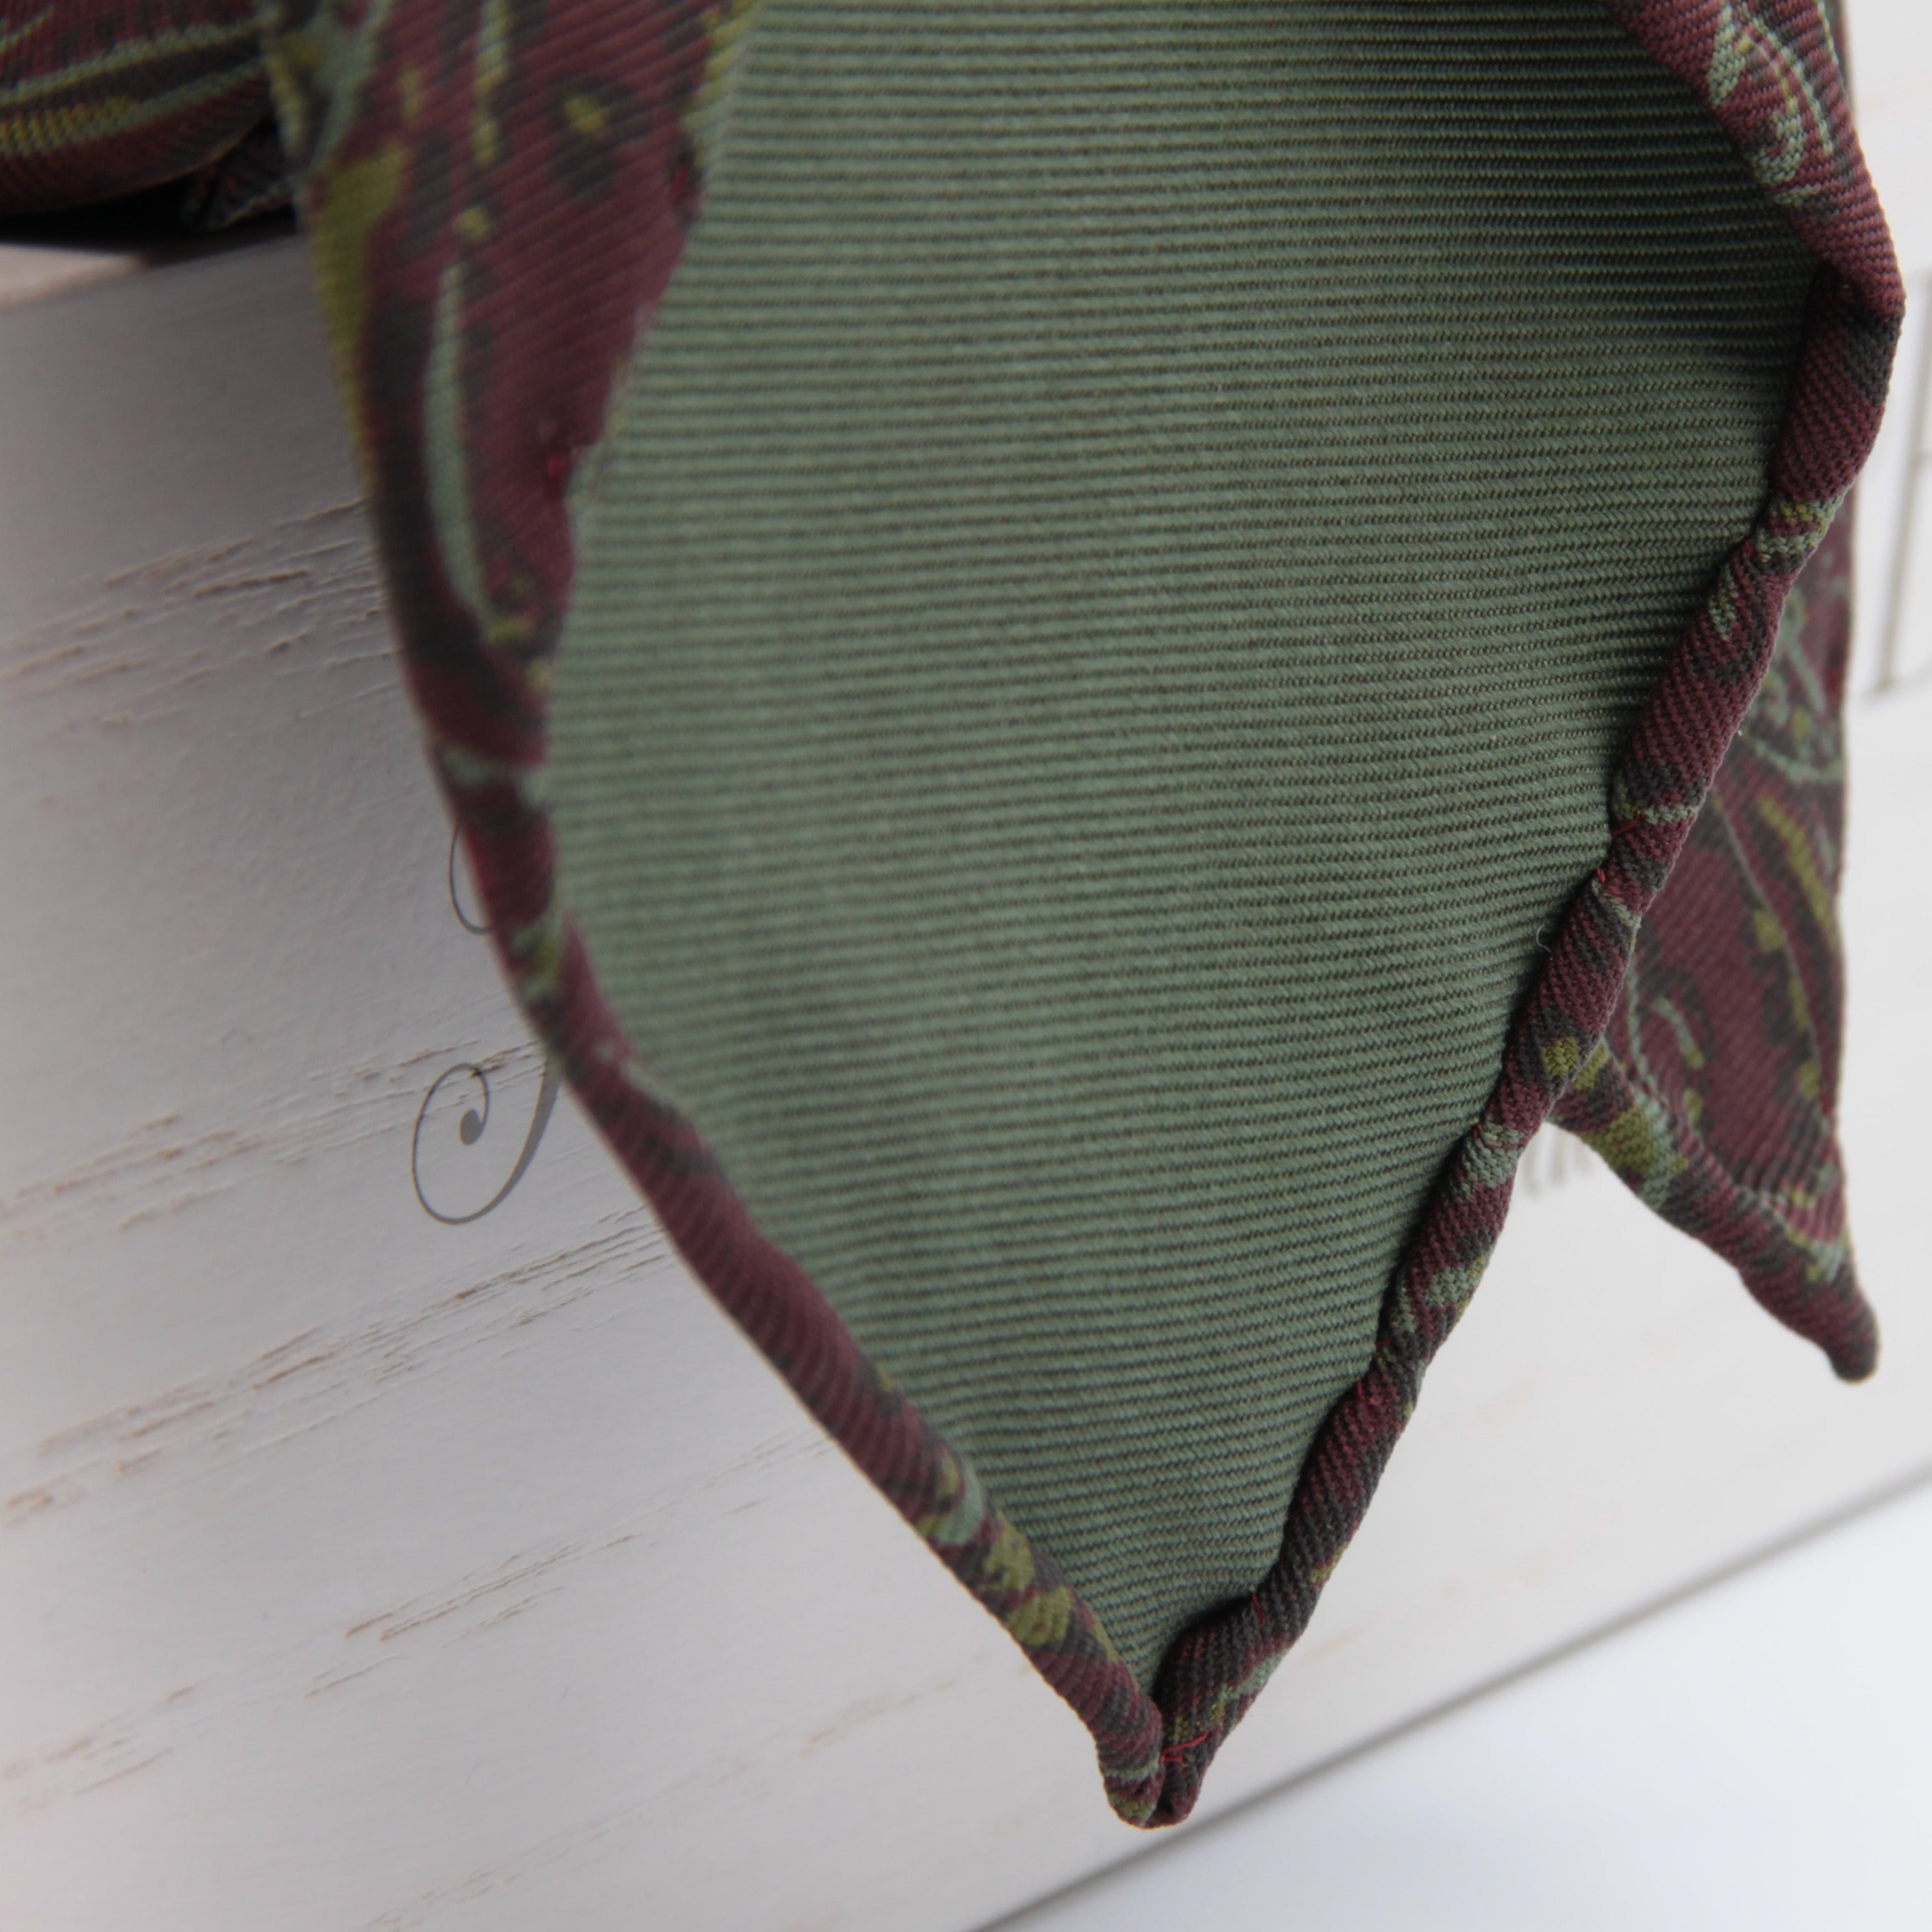 Holliday & Brown for Cruciani & Bella 100% printed Silk Unlined Seven Fold Wine and Green Paisley motif tie Handmade in Italy 8 cm x 150 cm #6951